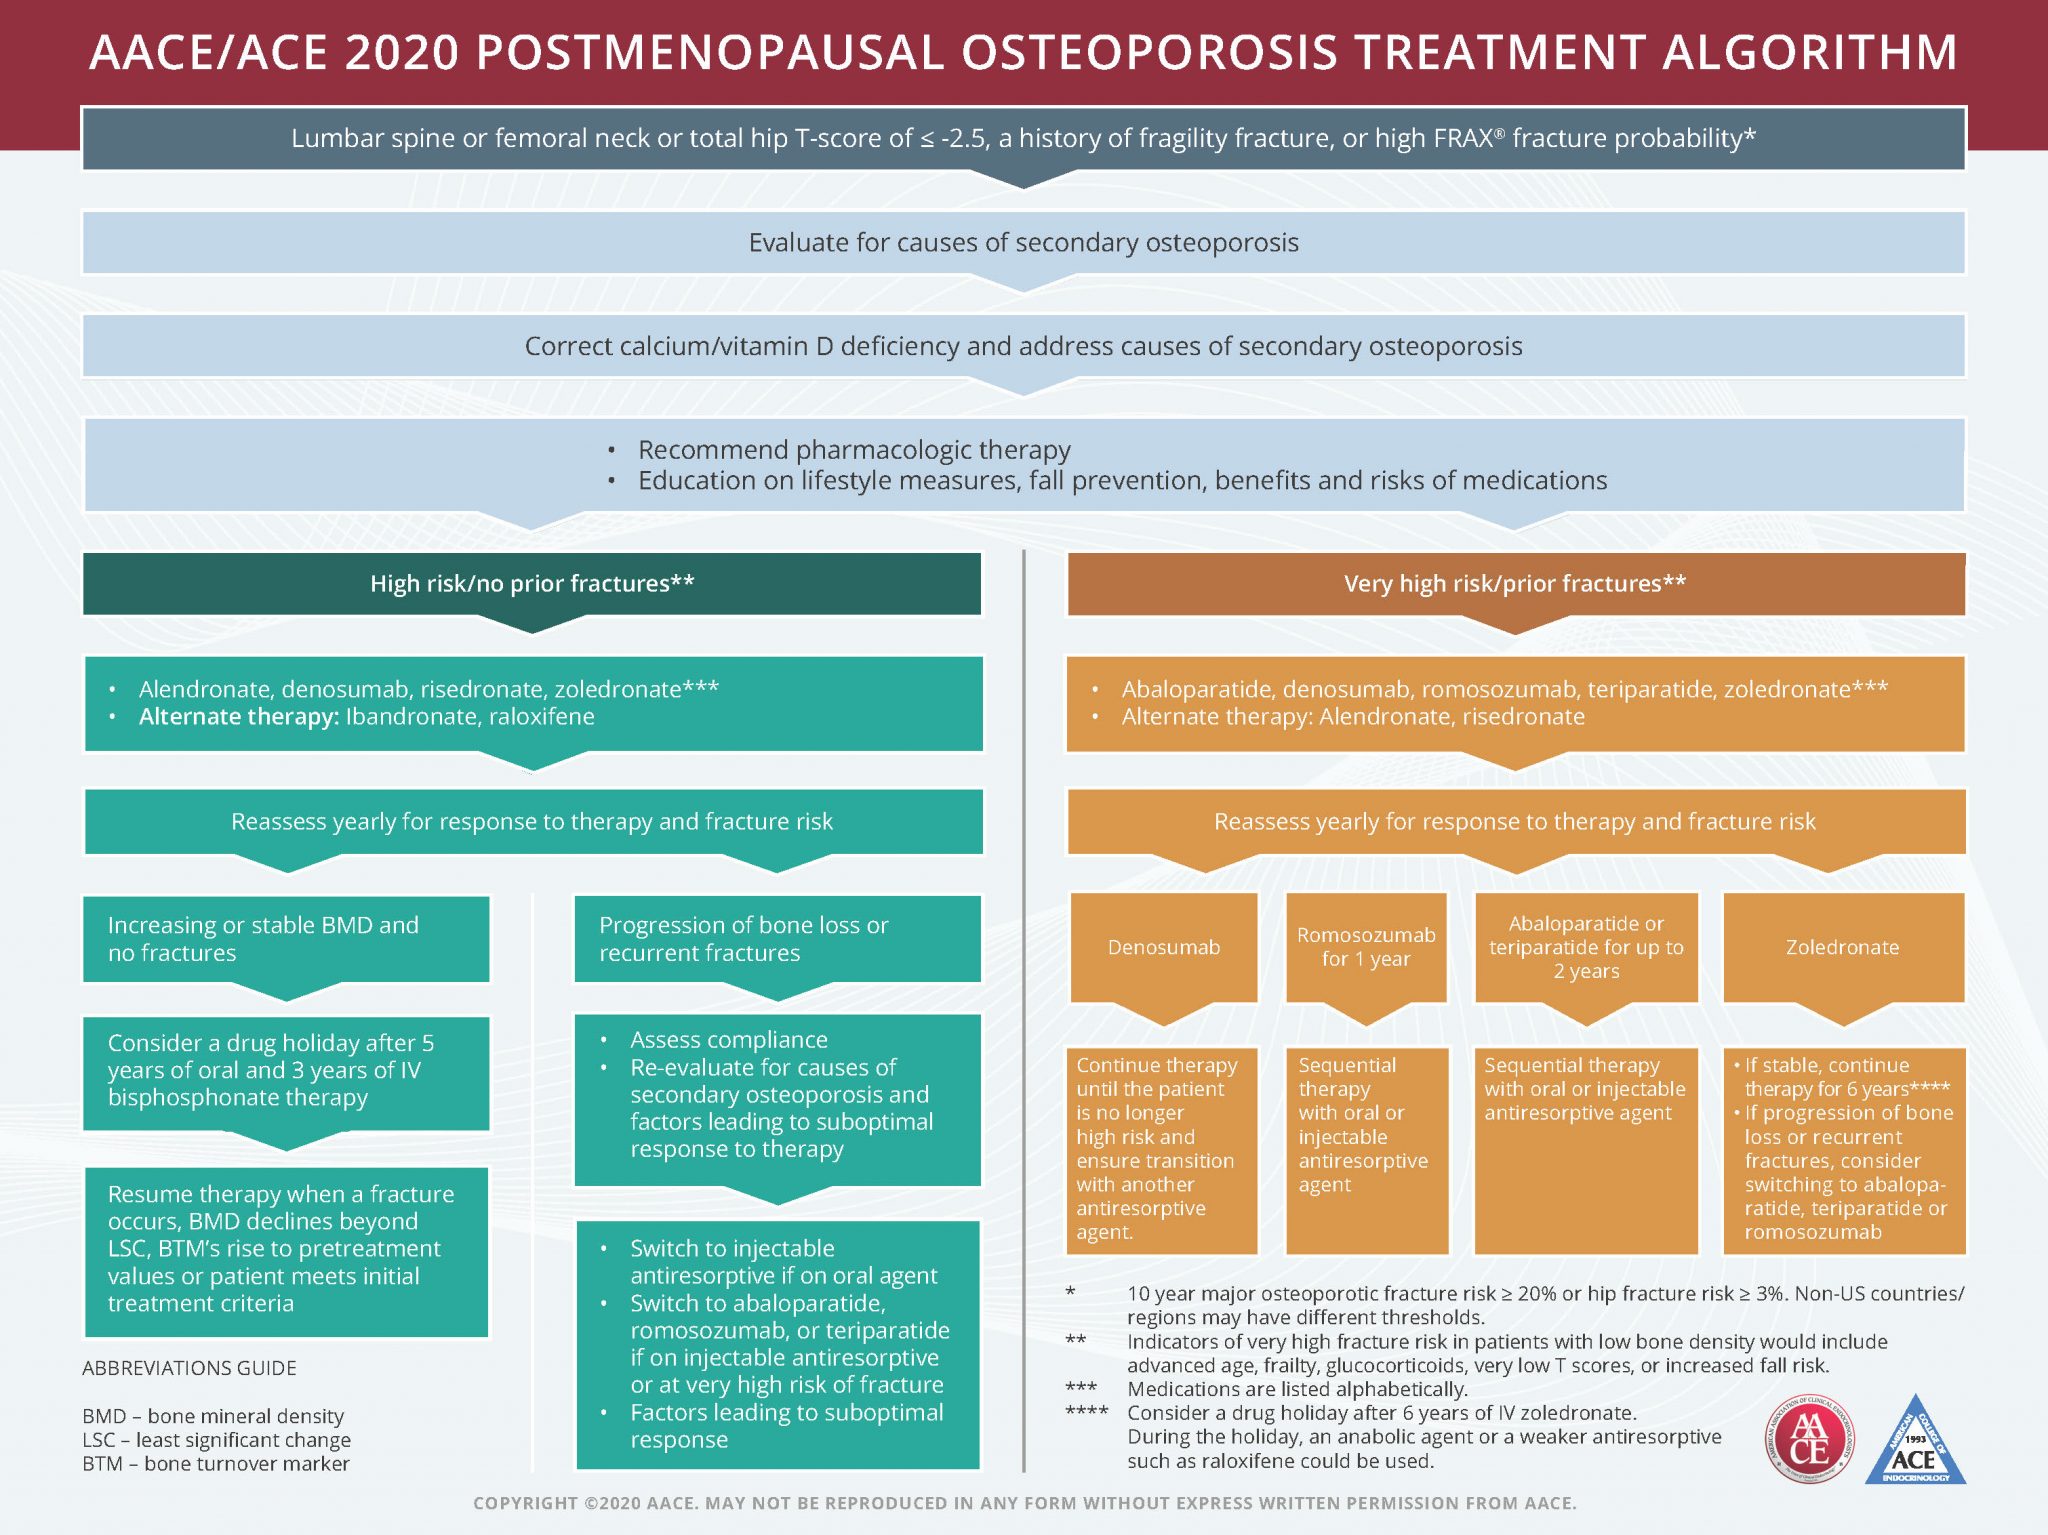 Postmenopausal osteoporosis: Latest clinical guidelines (part 1